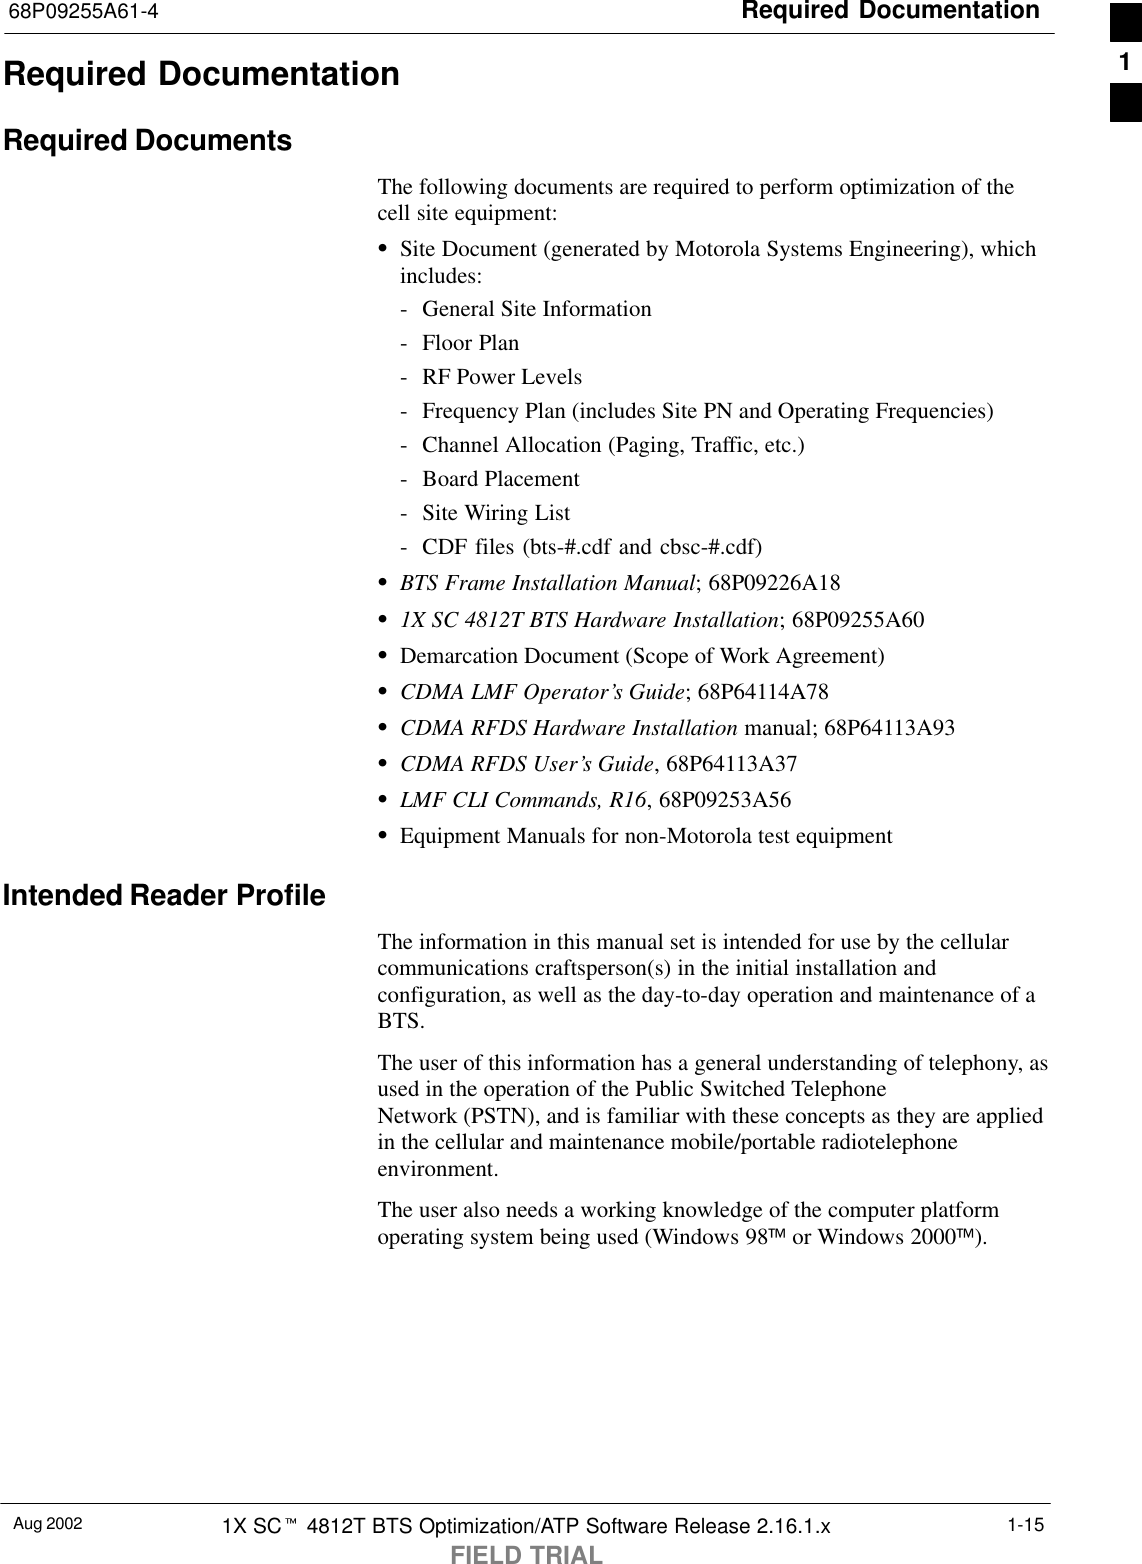 Required Documentation68P09255A61-4Aug 2002 1X SCt 4812T BTS Optimization/ATP Software Release 2.16.1.xFIELD TRIAL1-15Required DocumentationRequired DocumentsThe following documents are required to perform optimization of thecell site equipment:SSite Document (generated by Motorola Systems Engineering), whichincludes:- General Site Information- Floor Plan- RF Power Levels- Frequency Plan (includes Site PN and Operating Frequencies)- Channel Allocation (Paging, Traffic, etc.)- Board Placement- Site Wiring List- CDF files (bts-#.cdf and cbsc-#.cdf)SBTS Frame Installation Manual; 68P09226A18S1X SC 4812T BTS Hardware Installation; 68P09255A60SDemarcation Document (Scope of Work Agreement)SCDMA LMF Operator’s Guide; 68P64114A78SCDMA RFDS Hardware Installation manual; 68P64113A93SCDMA RFDS User’s Guide, 68P64113A37SLMF CLI Commands, R16, 68P09253A56SEquipment Manuals for non-Motorola test equipmentIntended Reader ProfileThe information in this manual set is intended for use by the cellularcommunications craftsperson(s) in the initial installation andconfiguration, as well as the day-to-day operation and maintenance of aBTS.The user of this information has a general understanding of telephony, asused in the operation of the Public Switched TelephoneNetwork (PSTN), and is familiar with these concepts as they are appliedin the cellular and maintenance mobile/portable radiotelephoneenvironment.The user also needs a working knowledge of the computer platformoperating system being used (Windows 98 or Windows 2000).1